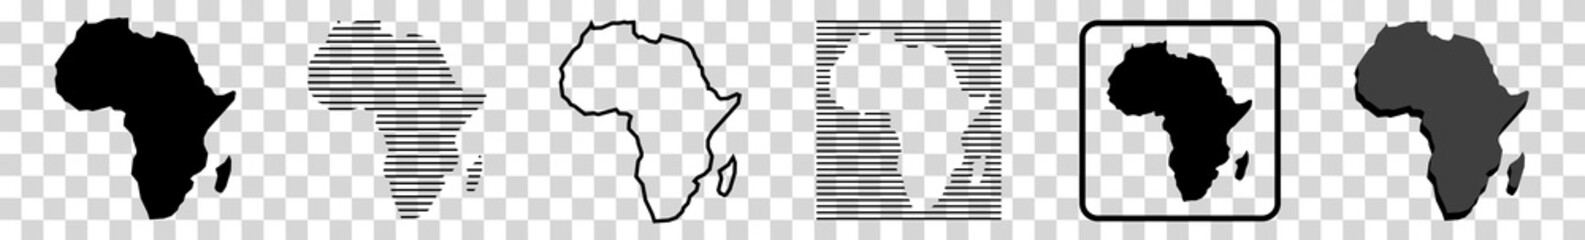 Africa Map | African Border | Continent | Isolated Transparent | Variations